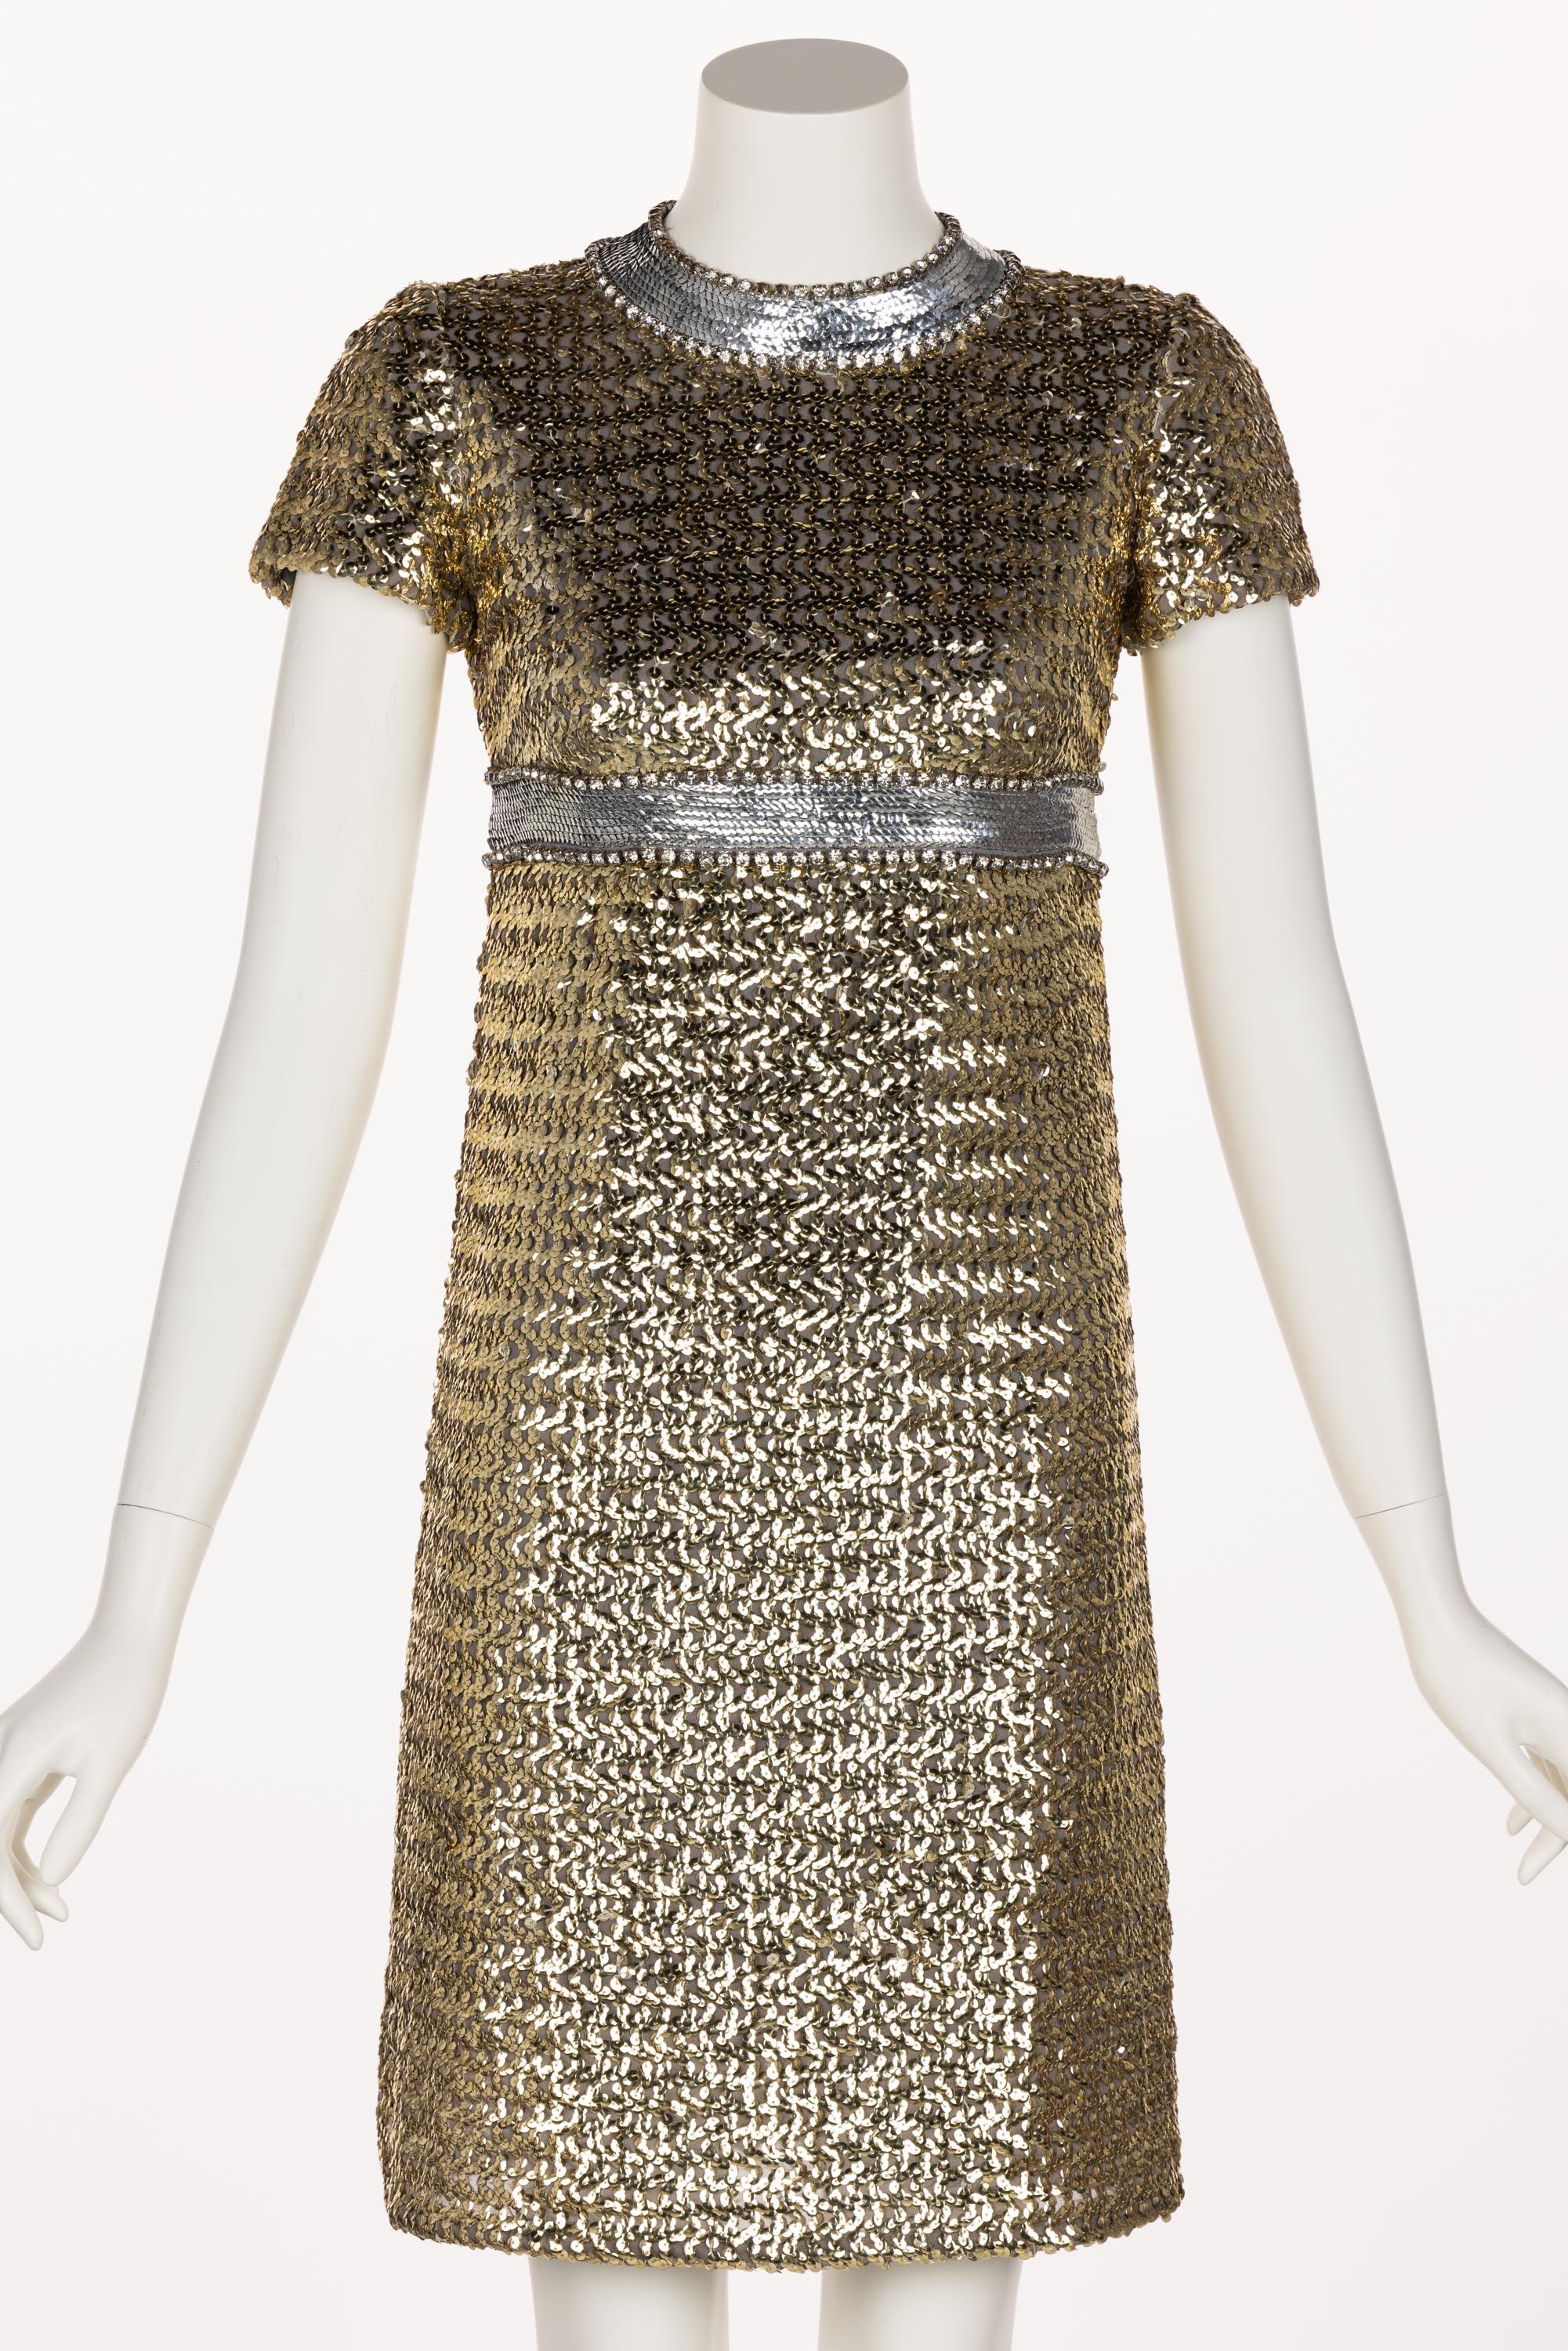 The designer of this dress is unknown, but that makes it no less spectacular. Possibly created by renowned Italian-French designer Pierre A. Cardin, this 1960’s dress is an incredible statement piece. Done in gold and silver sequins with prong-set